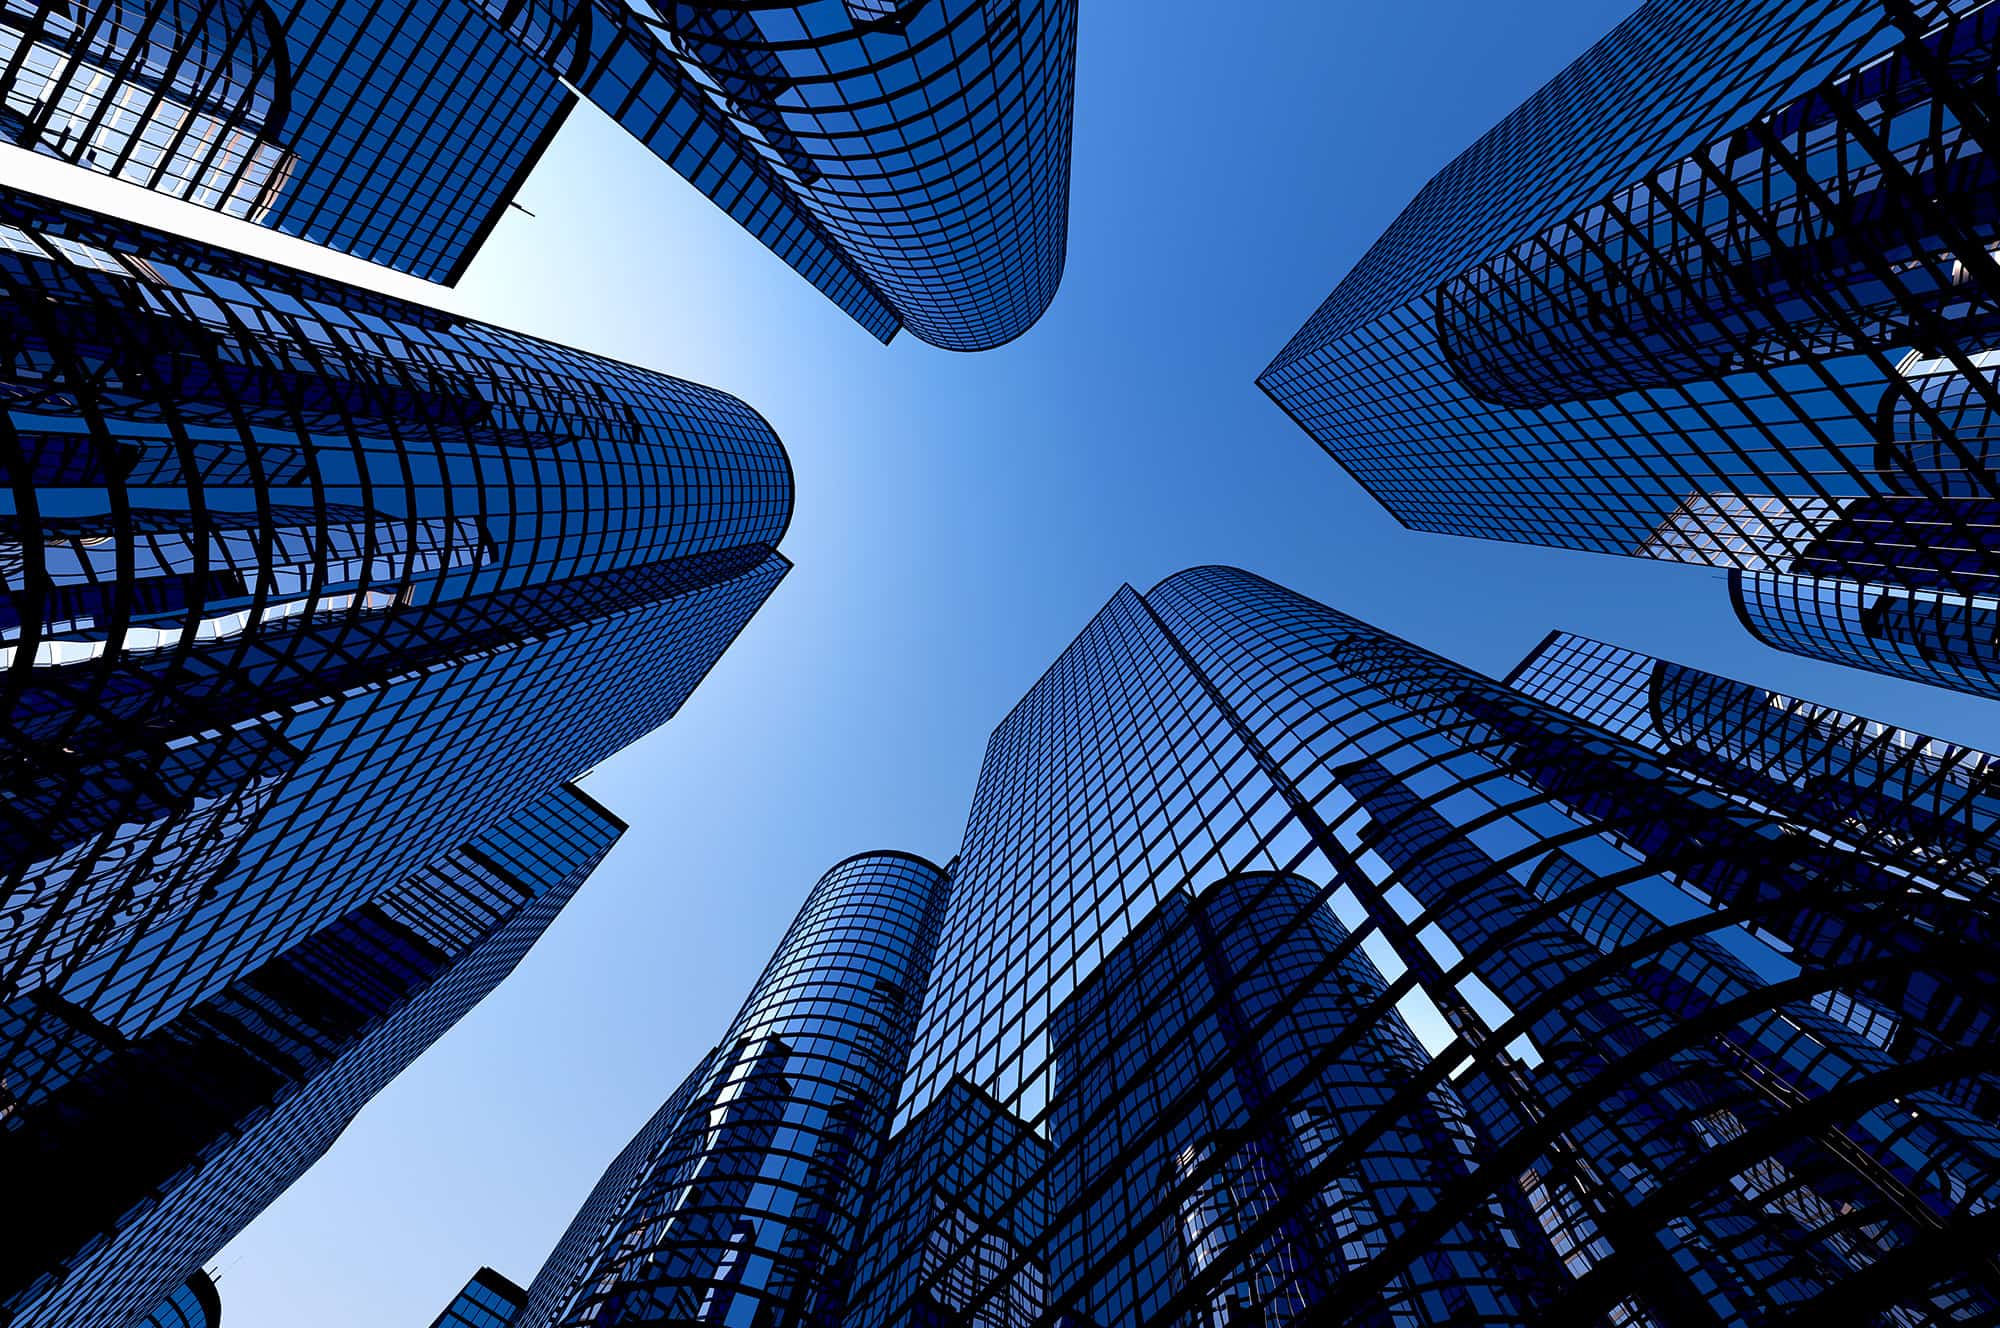 Skyscrapers reaching towards a clear blue sky, forming a cross-shaped negative space at the center.